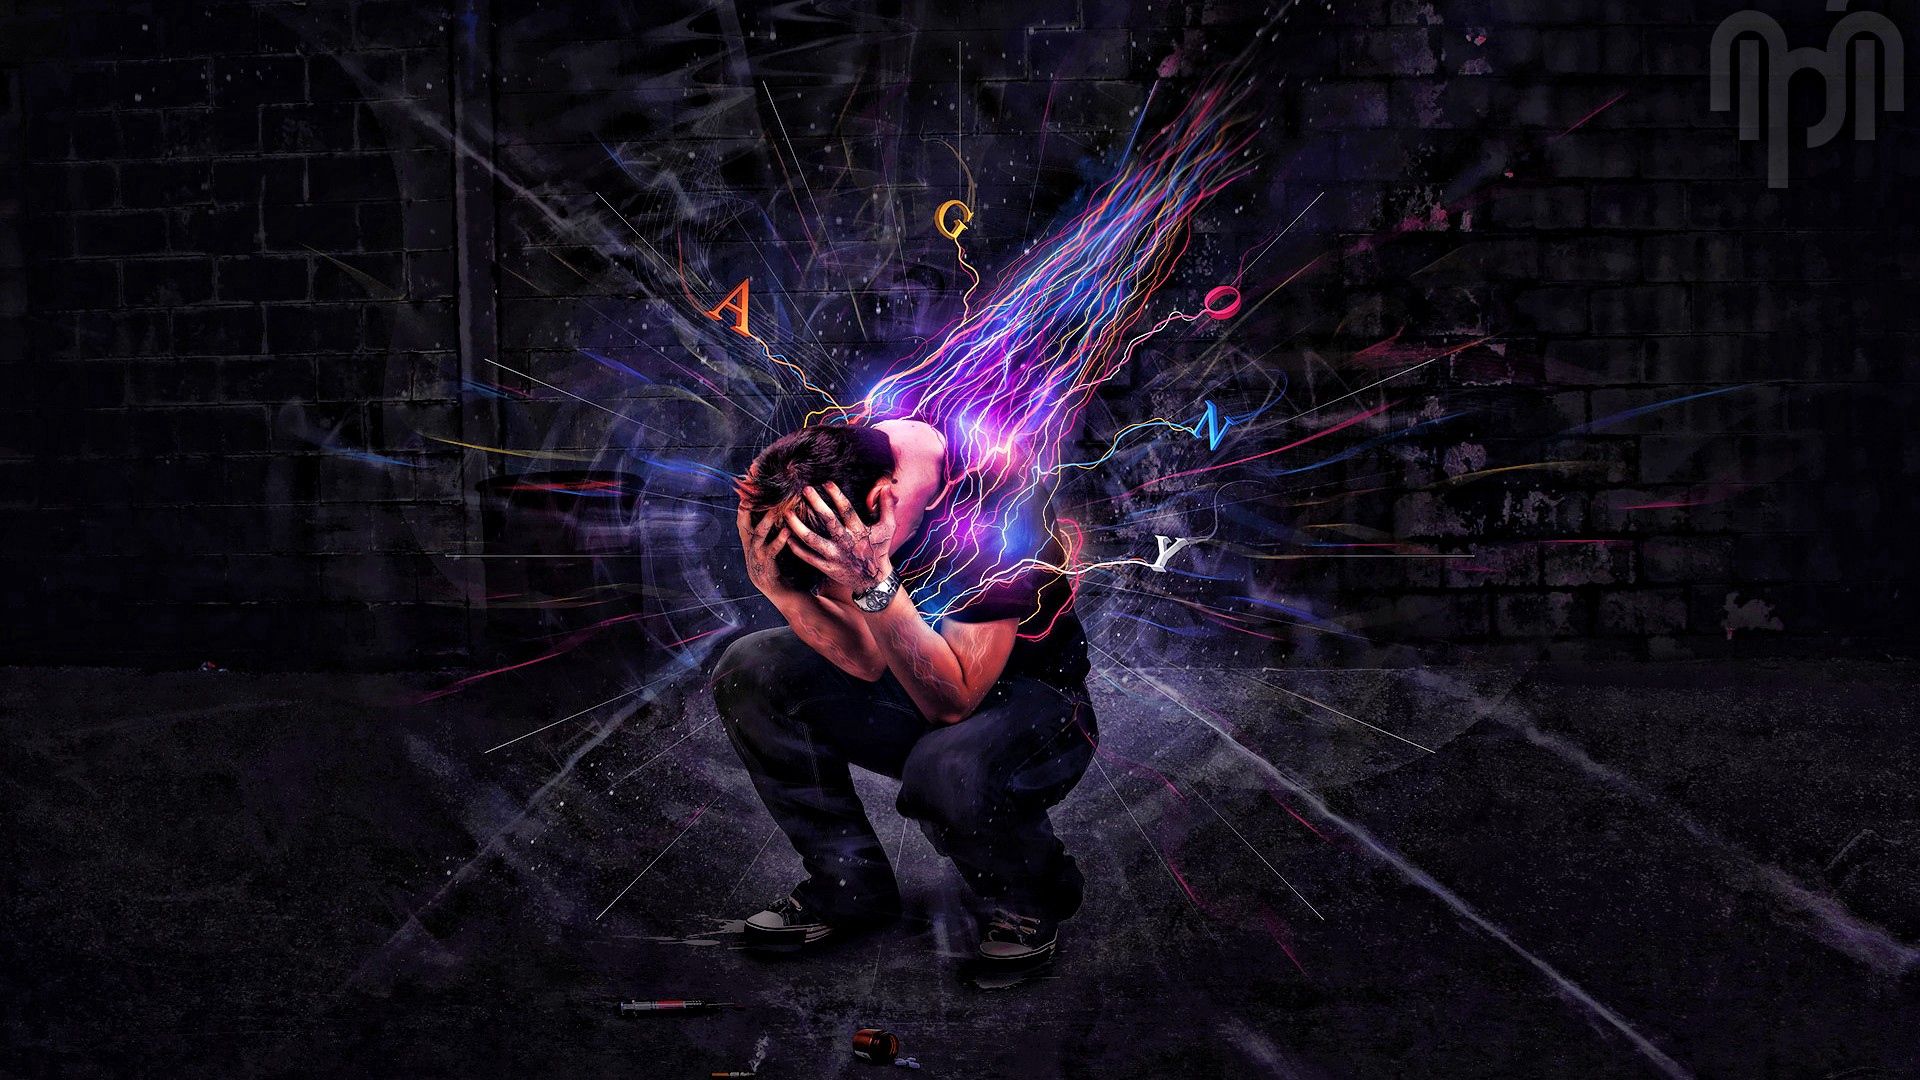 Phone Background paints, explosion, man, abstract